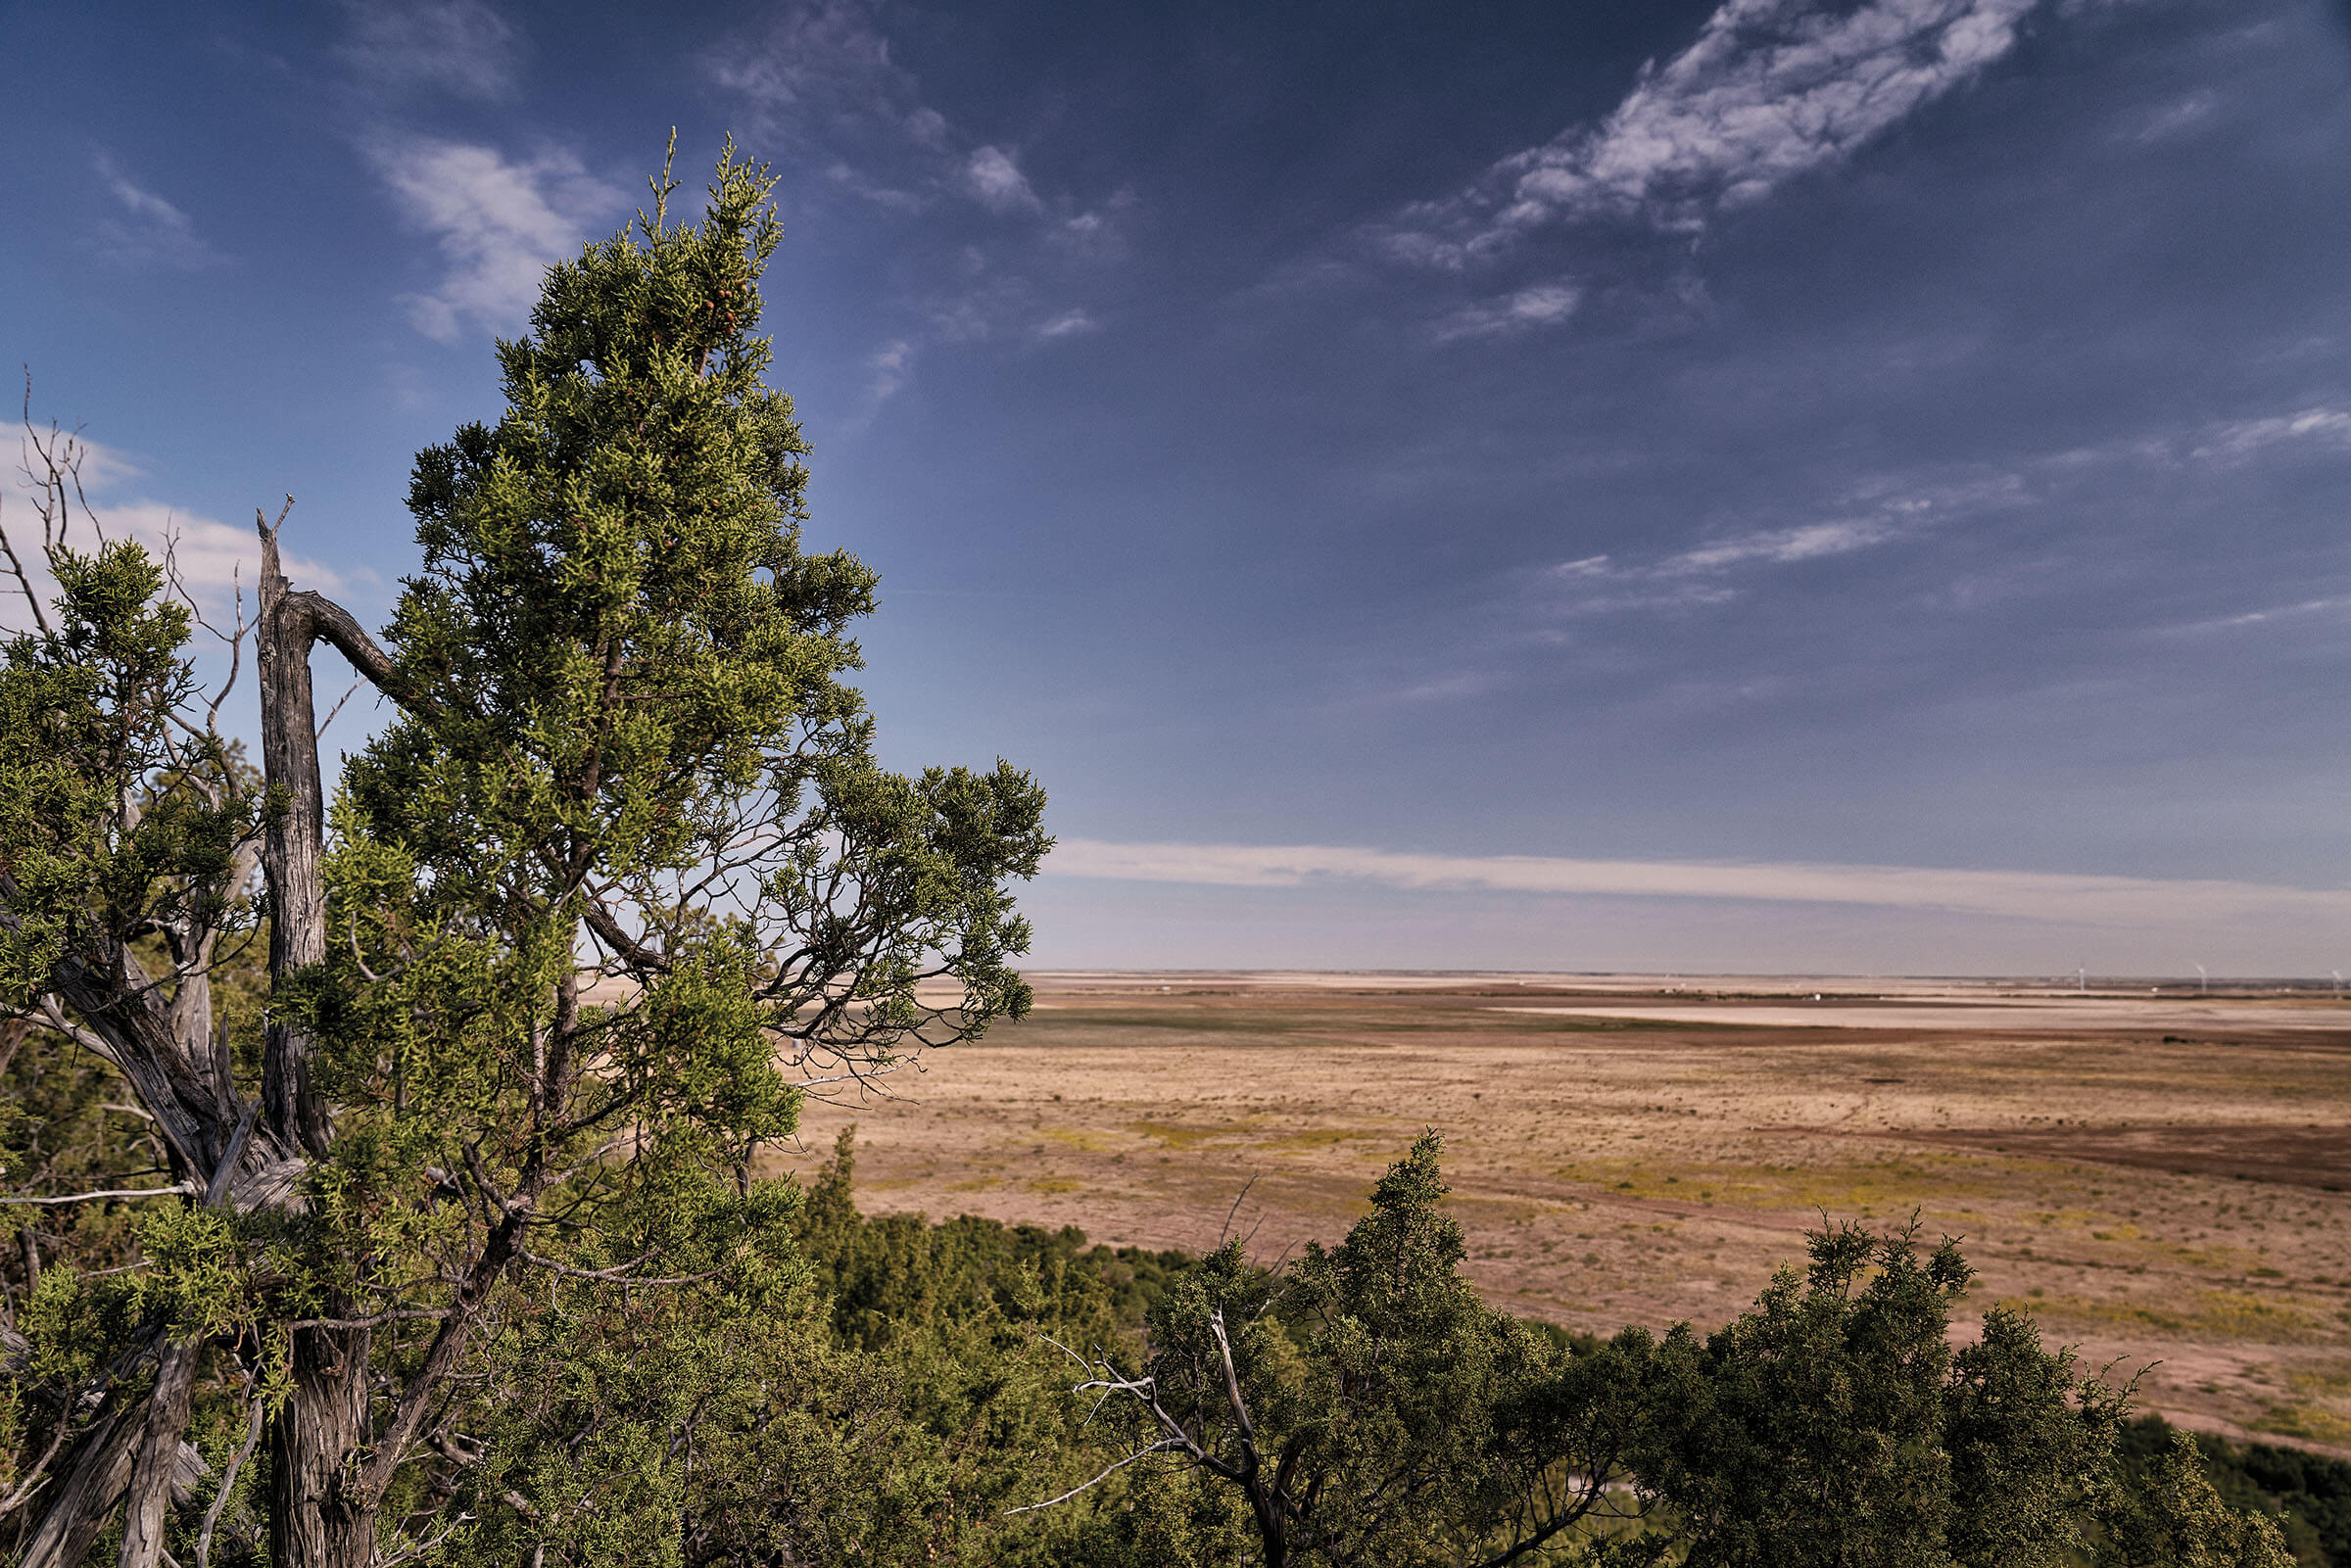 Green trees grow from the top of a mound looking out over a vast, dry desert landscape